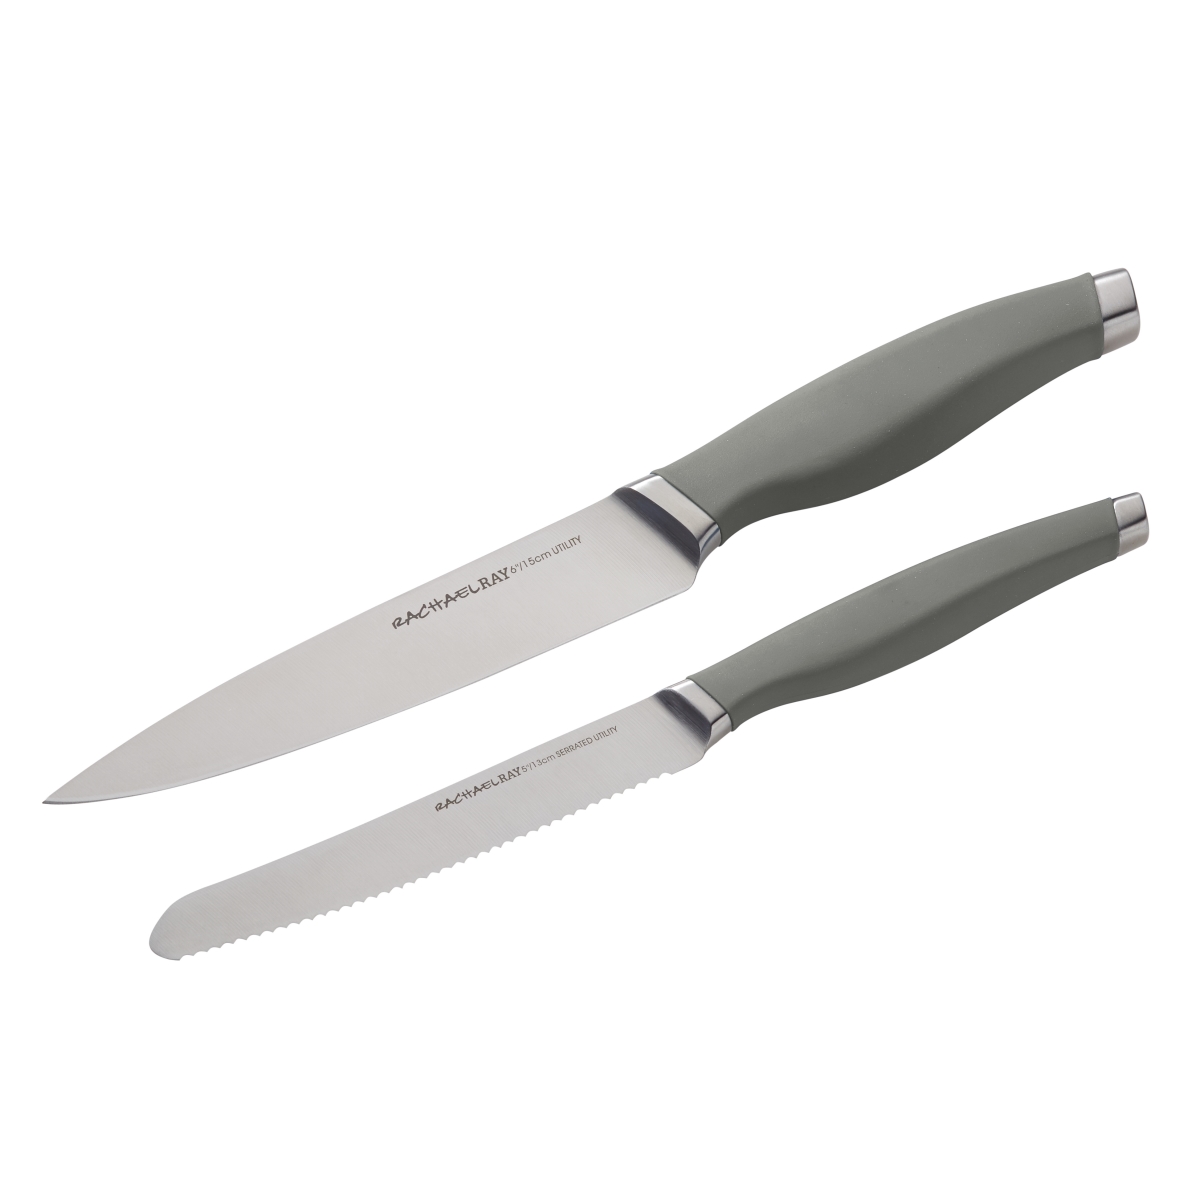 47757 Cutlery Japanese Stainless Steel Utility Knife Set - Gray, 2 Piece